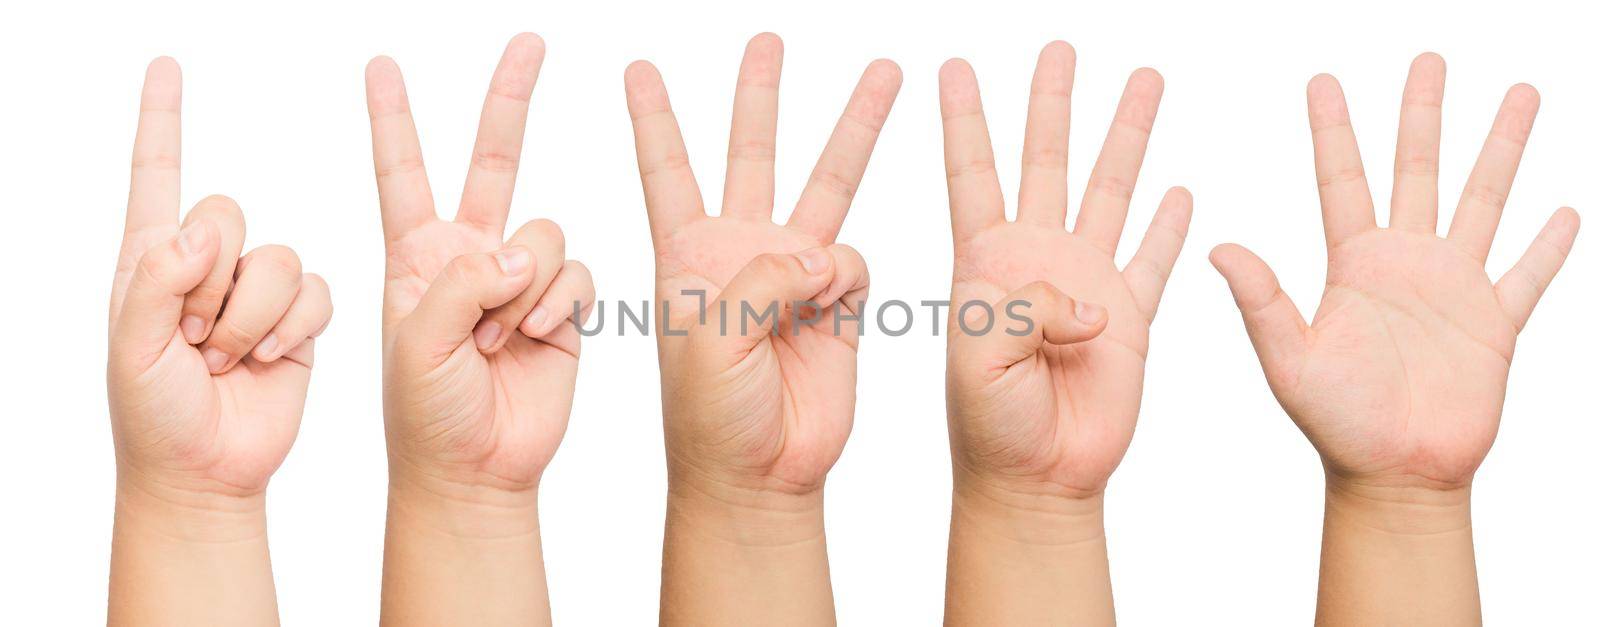 people count by finger 1 to 5 front and back